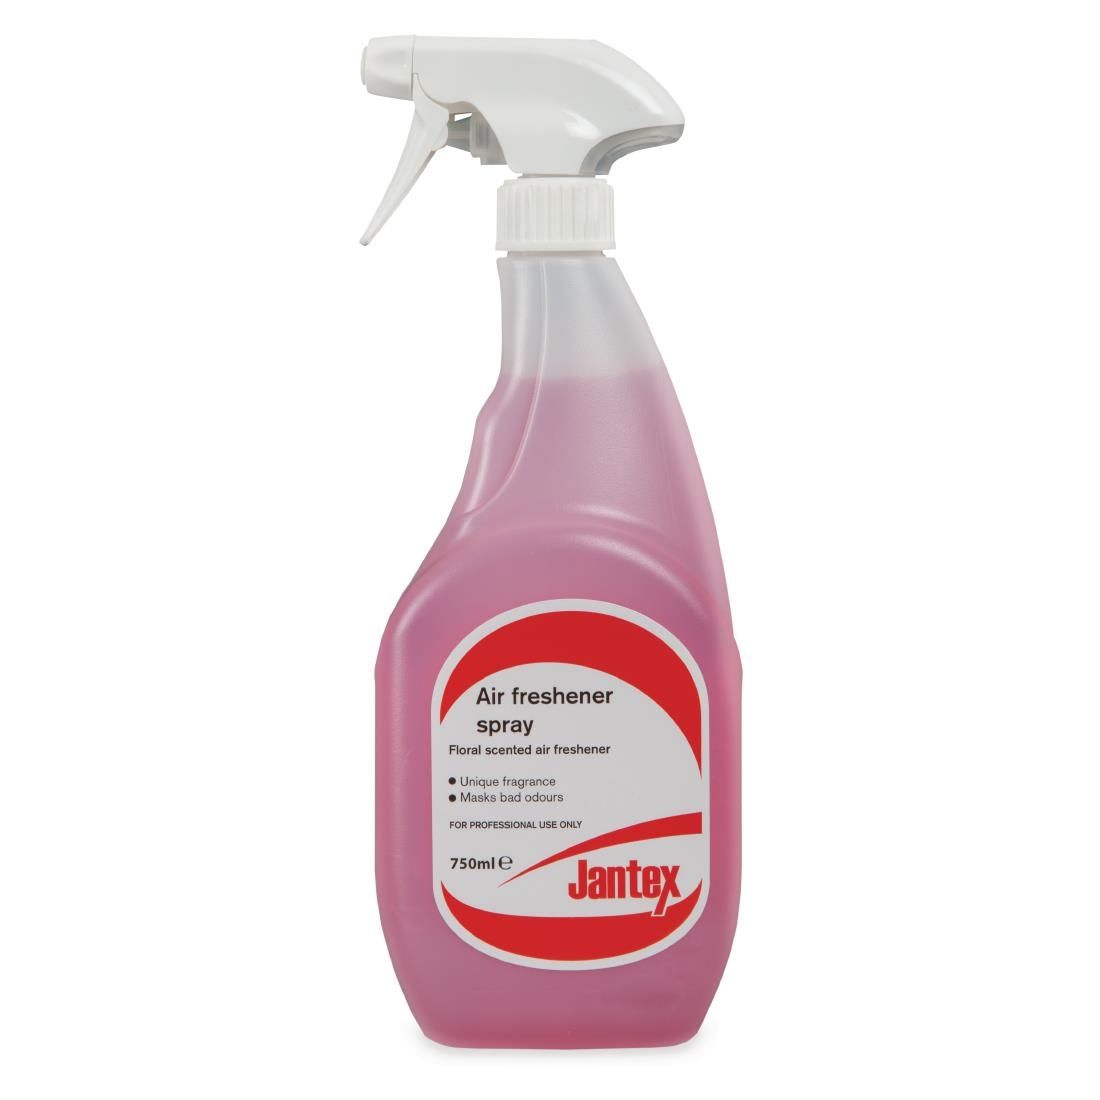 Jantex Air Freshener Spray Ready To Use 750ml JD Catering Equipment Solutions Ltd